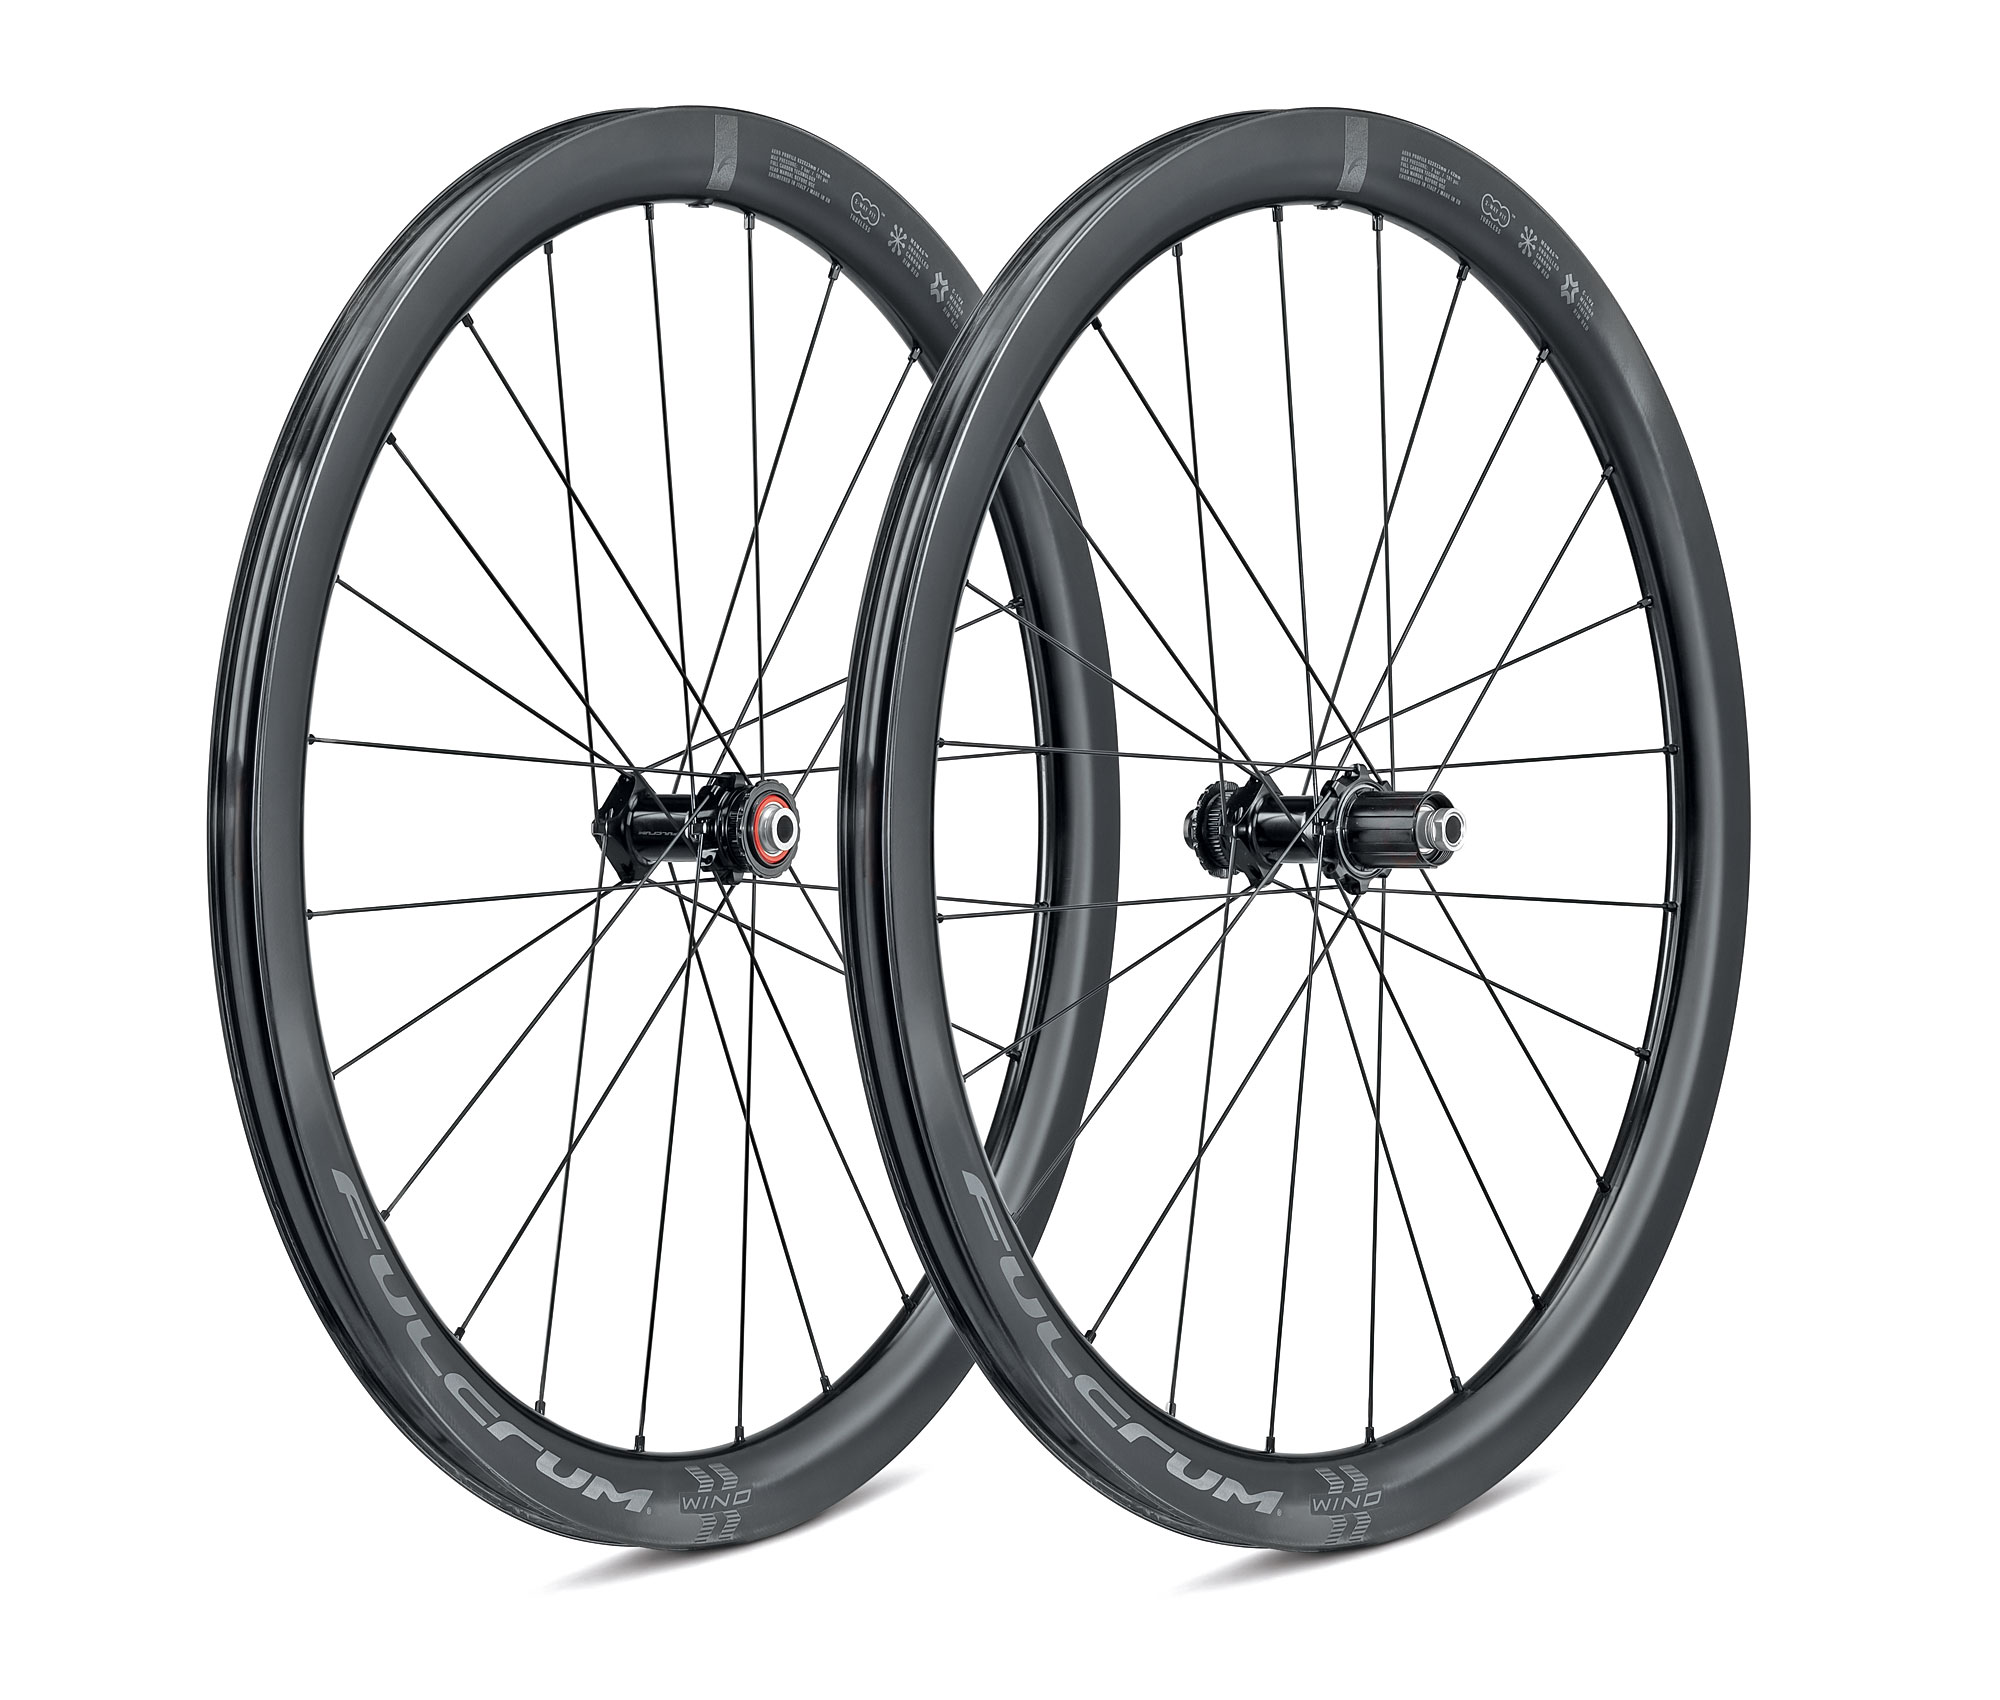 Fulcrum Wind 57mm affordable wide European aero carbon all road wheelset